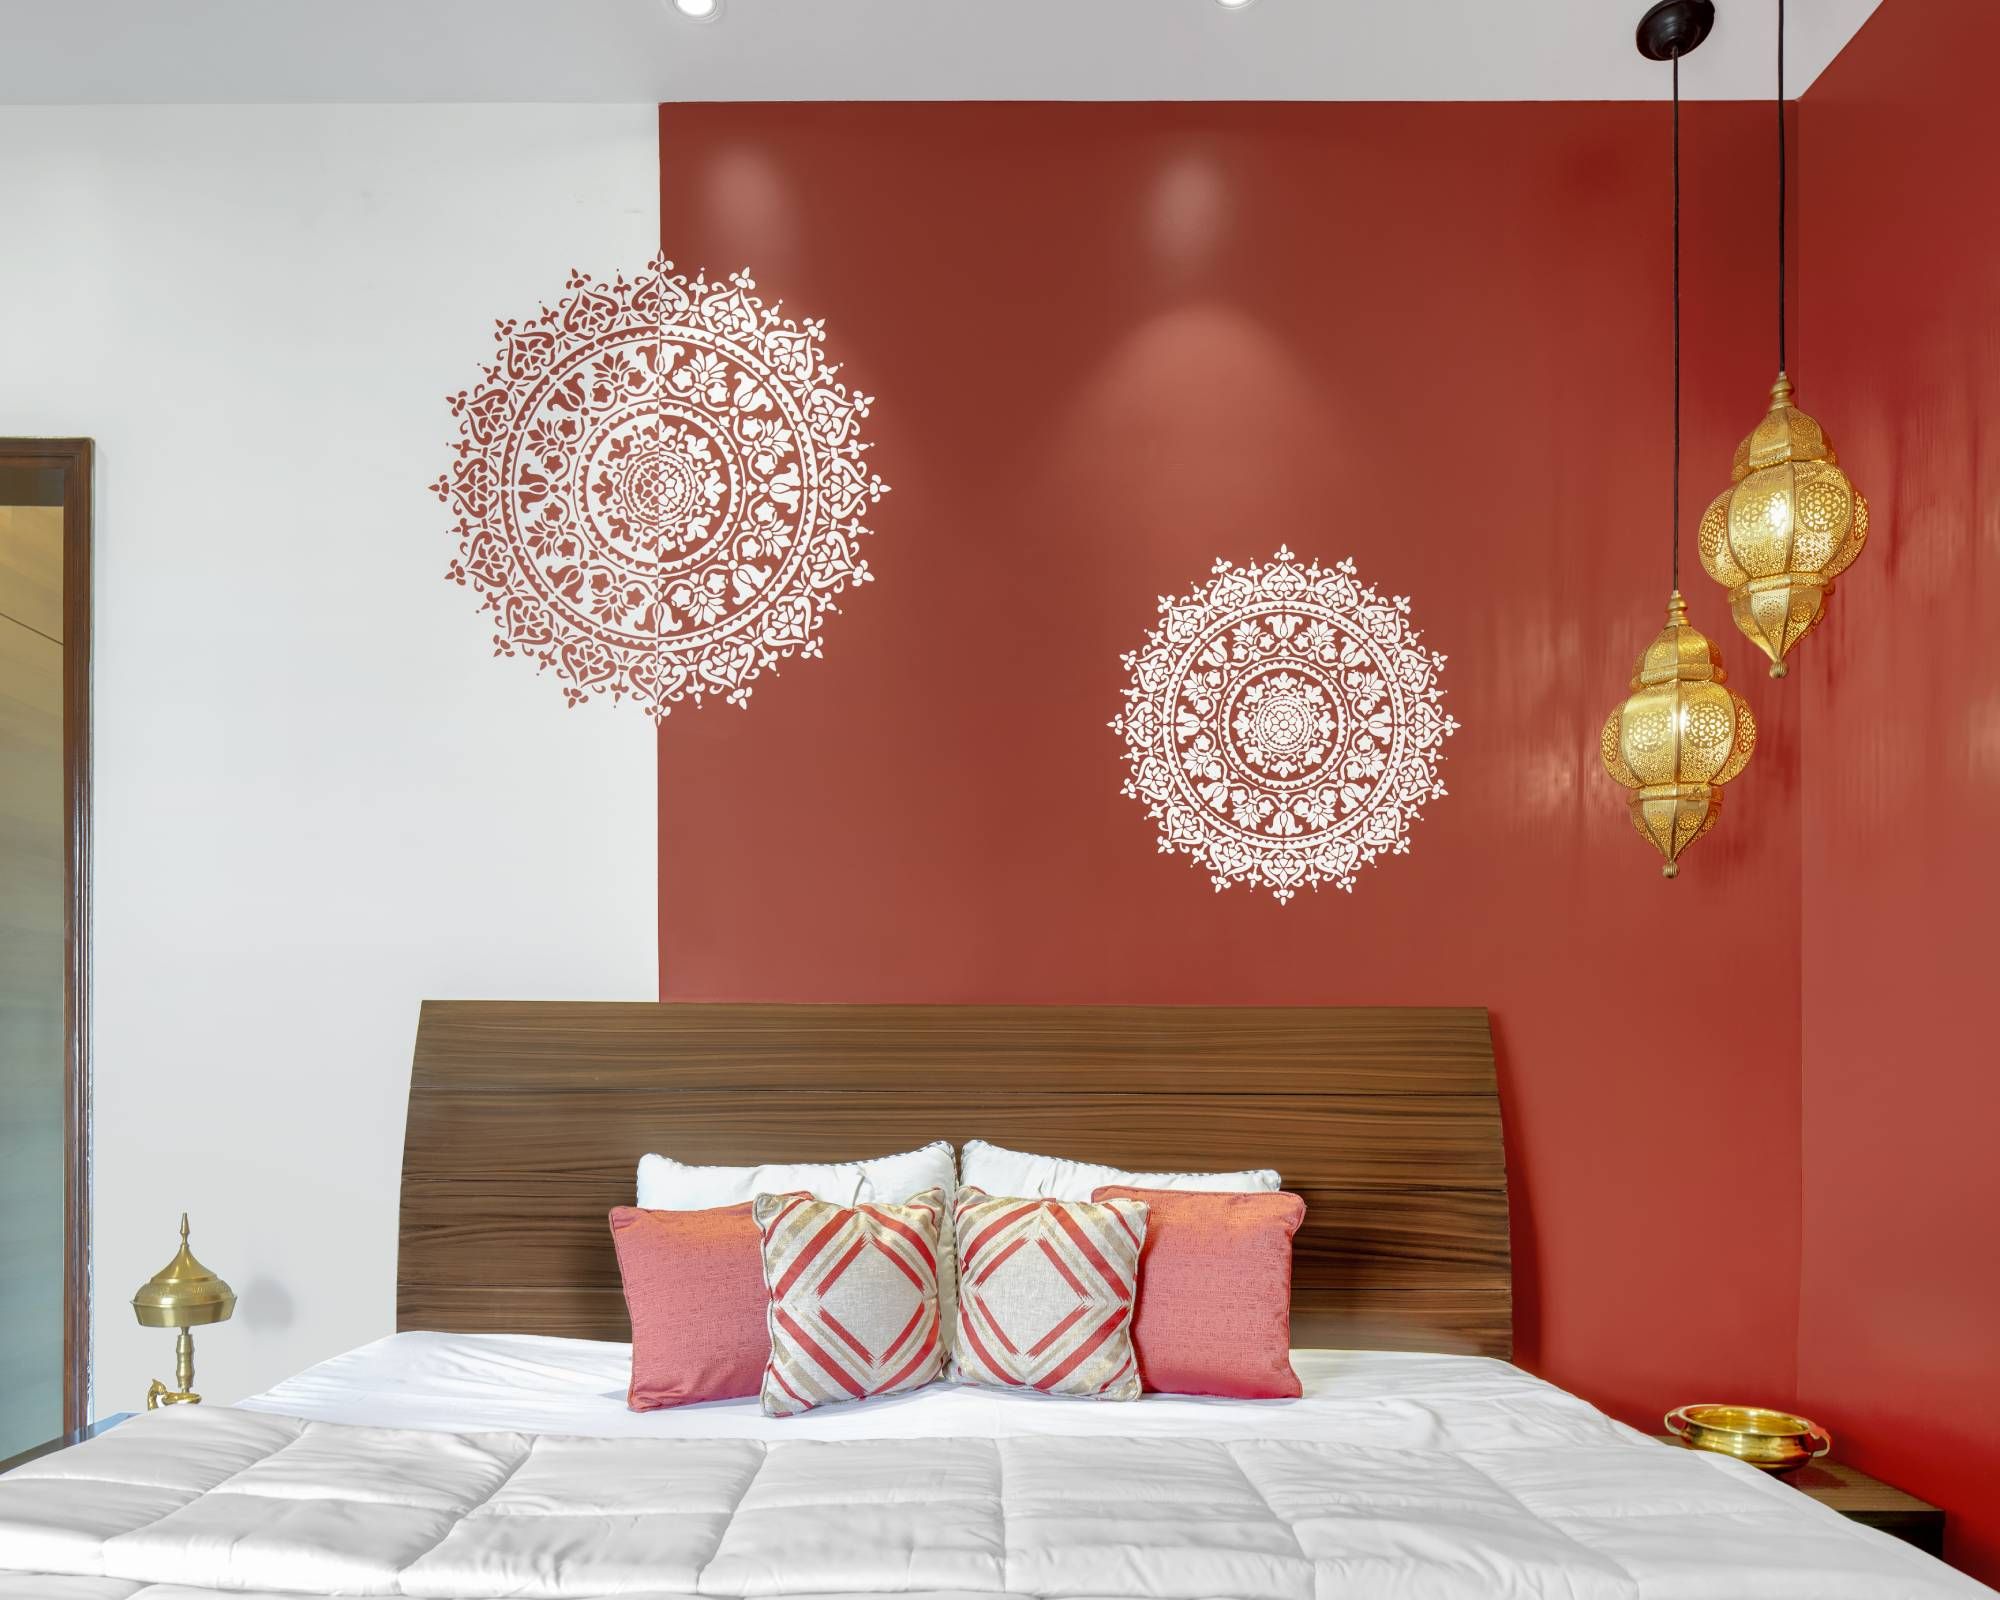 Modern Guest Room Design With Red And White Wall With Mandala Design